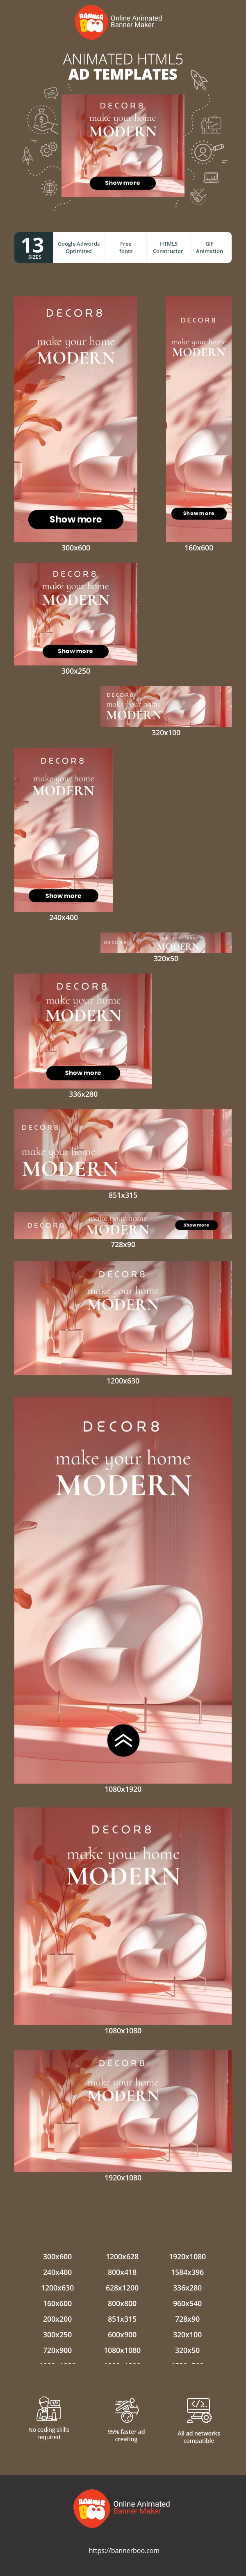 Banner ad template — Make Your Home Modern — Furniture